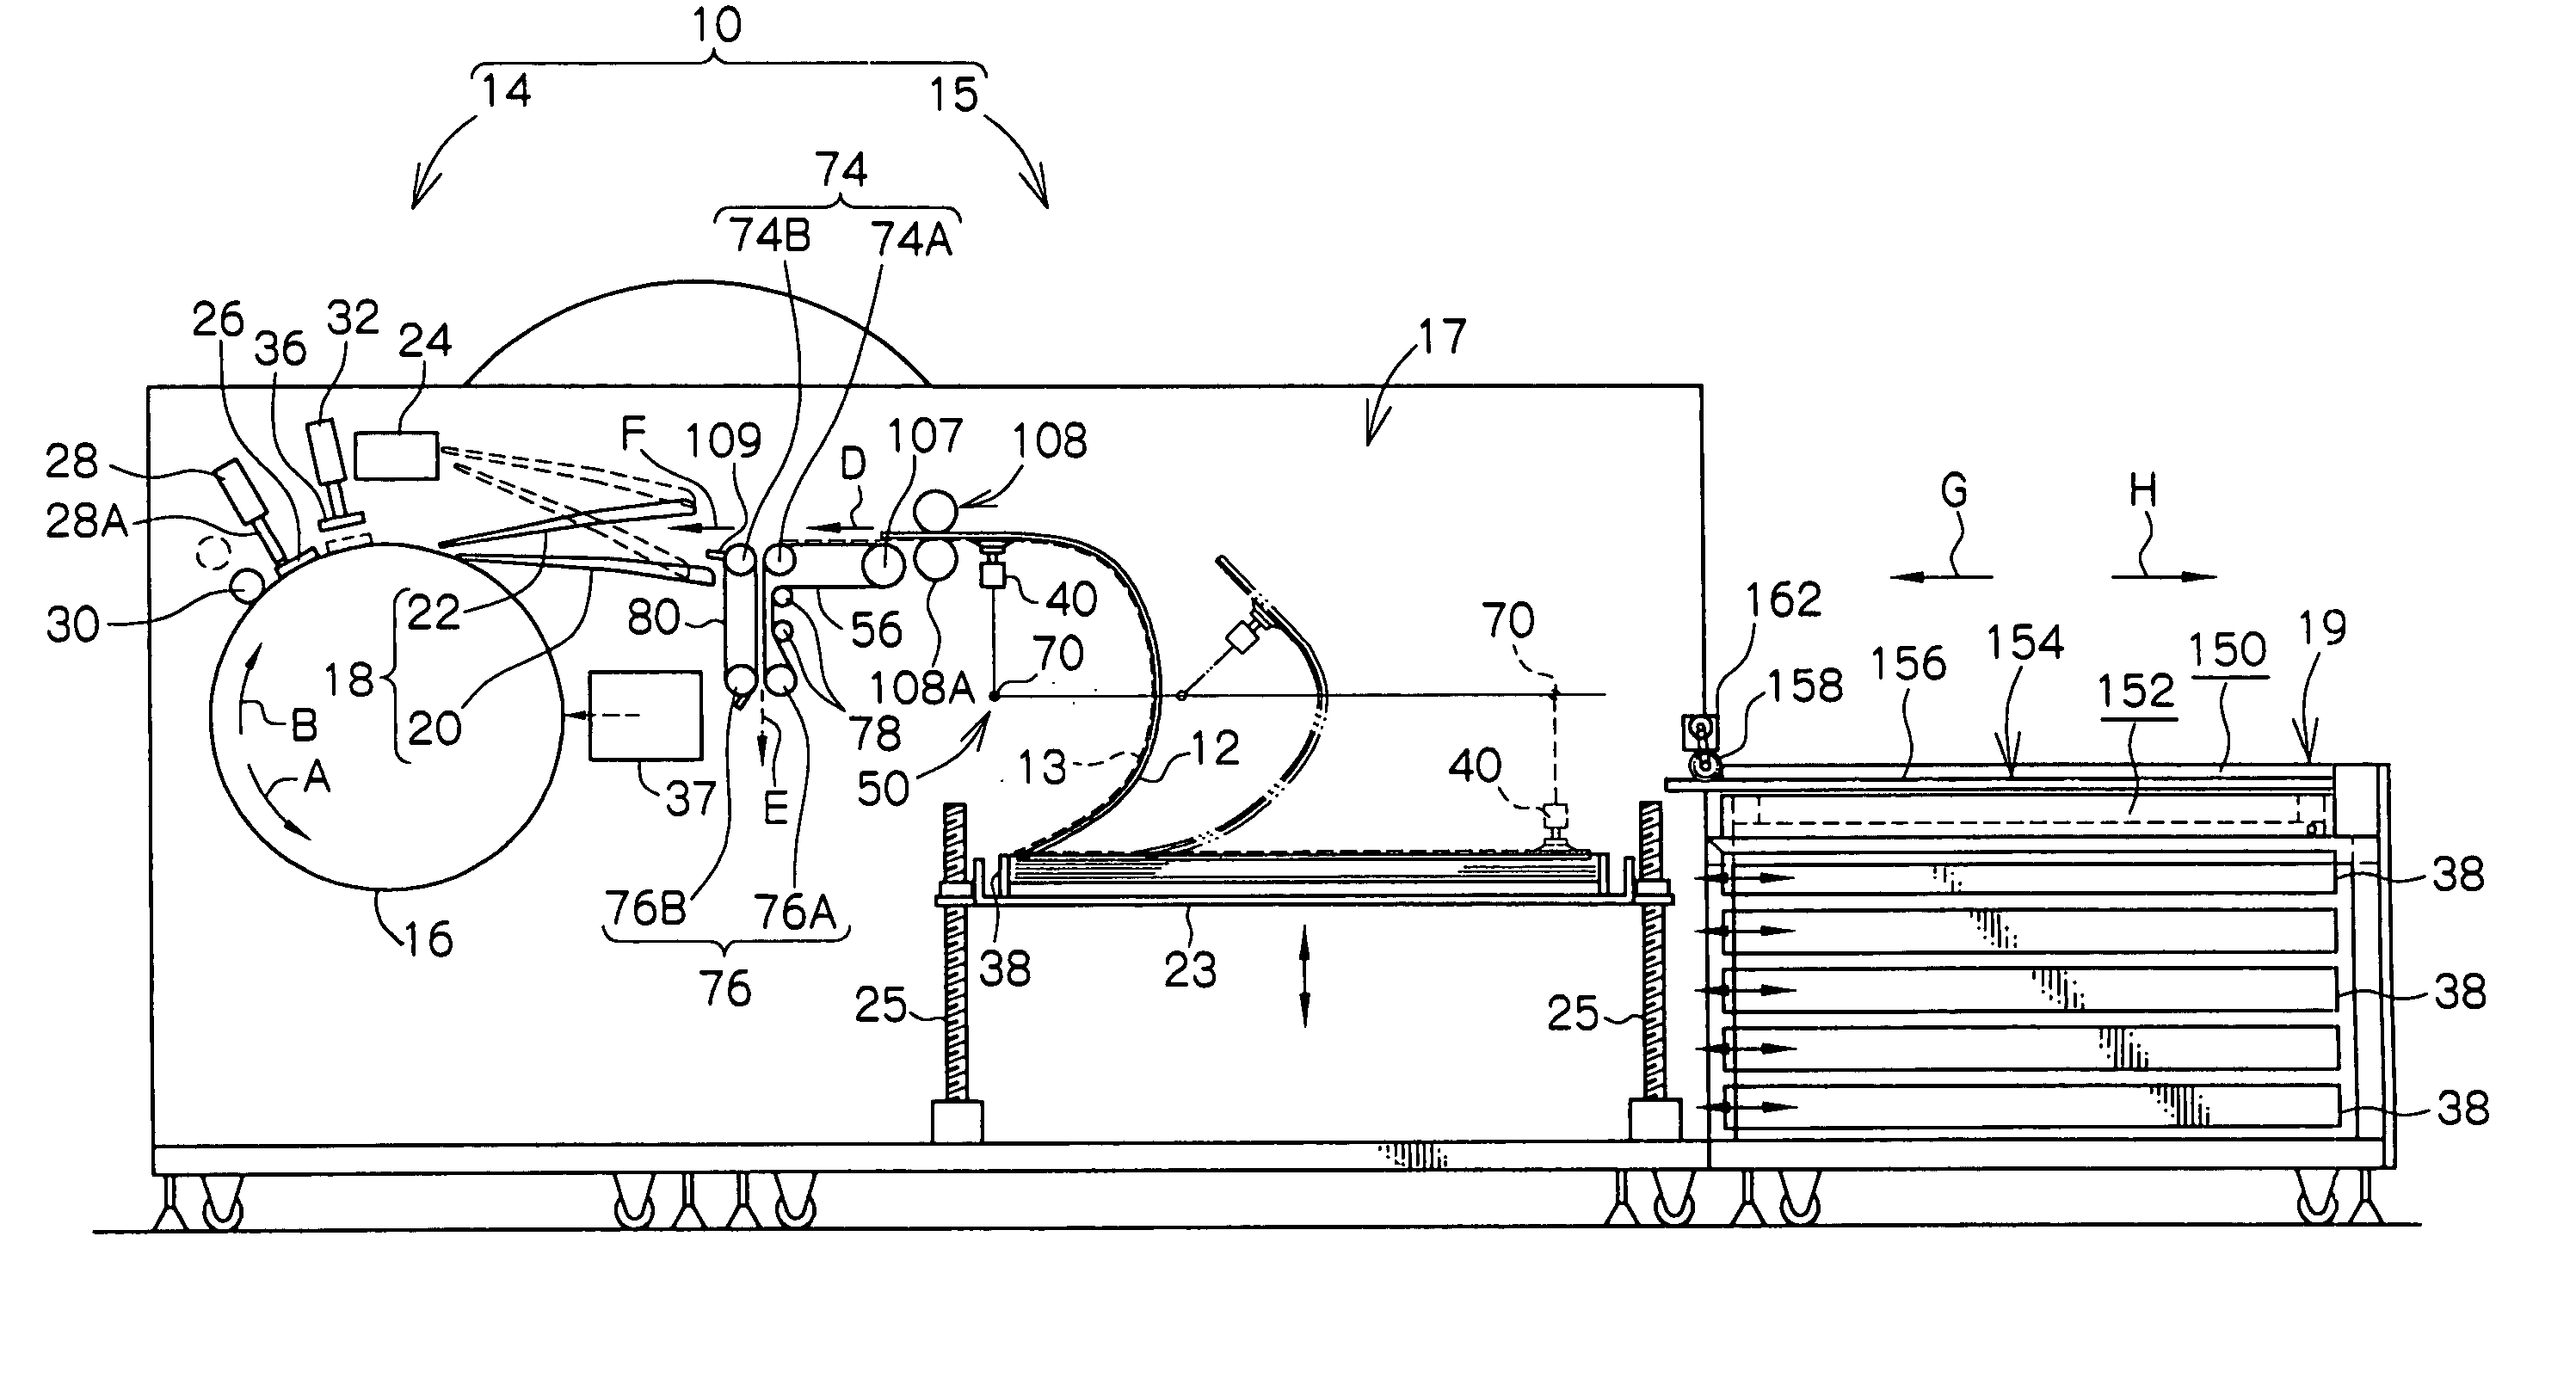 Printing plate removing/supplying device